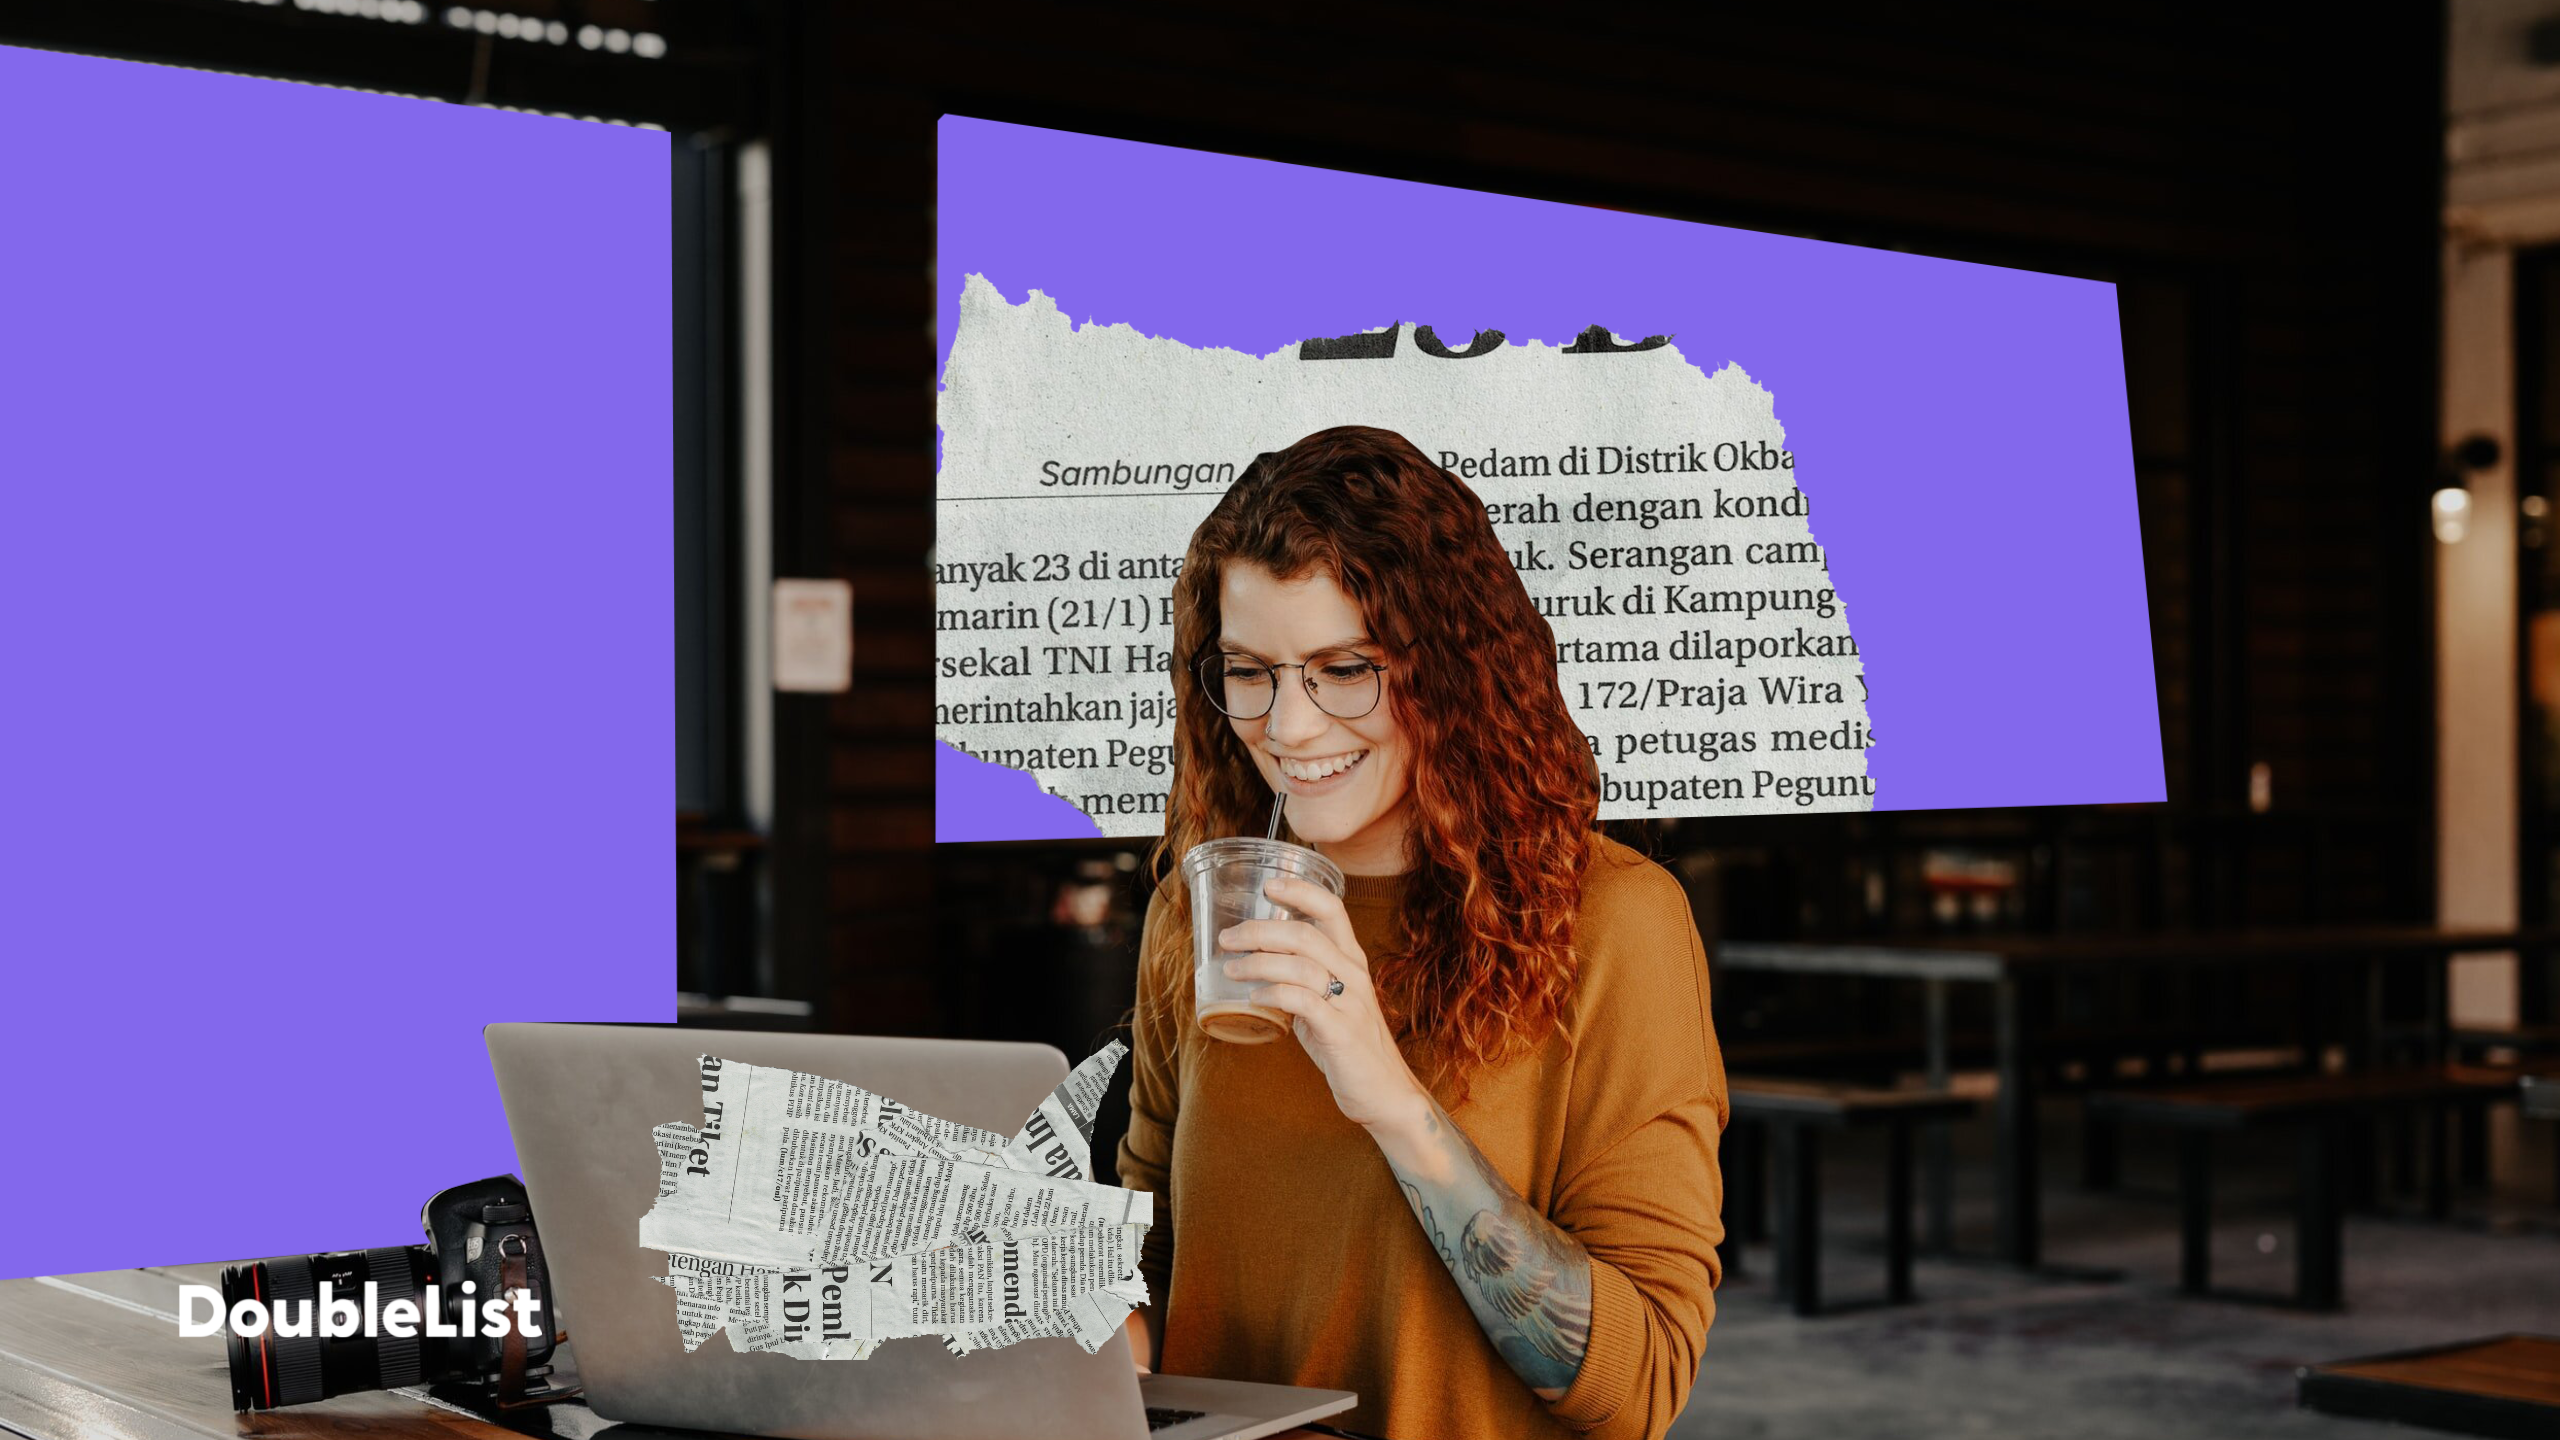 DoubleList graphic of a woman smiling and drinking iced coffee while browsing dating websites on a laptop in an office space.